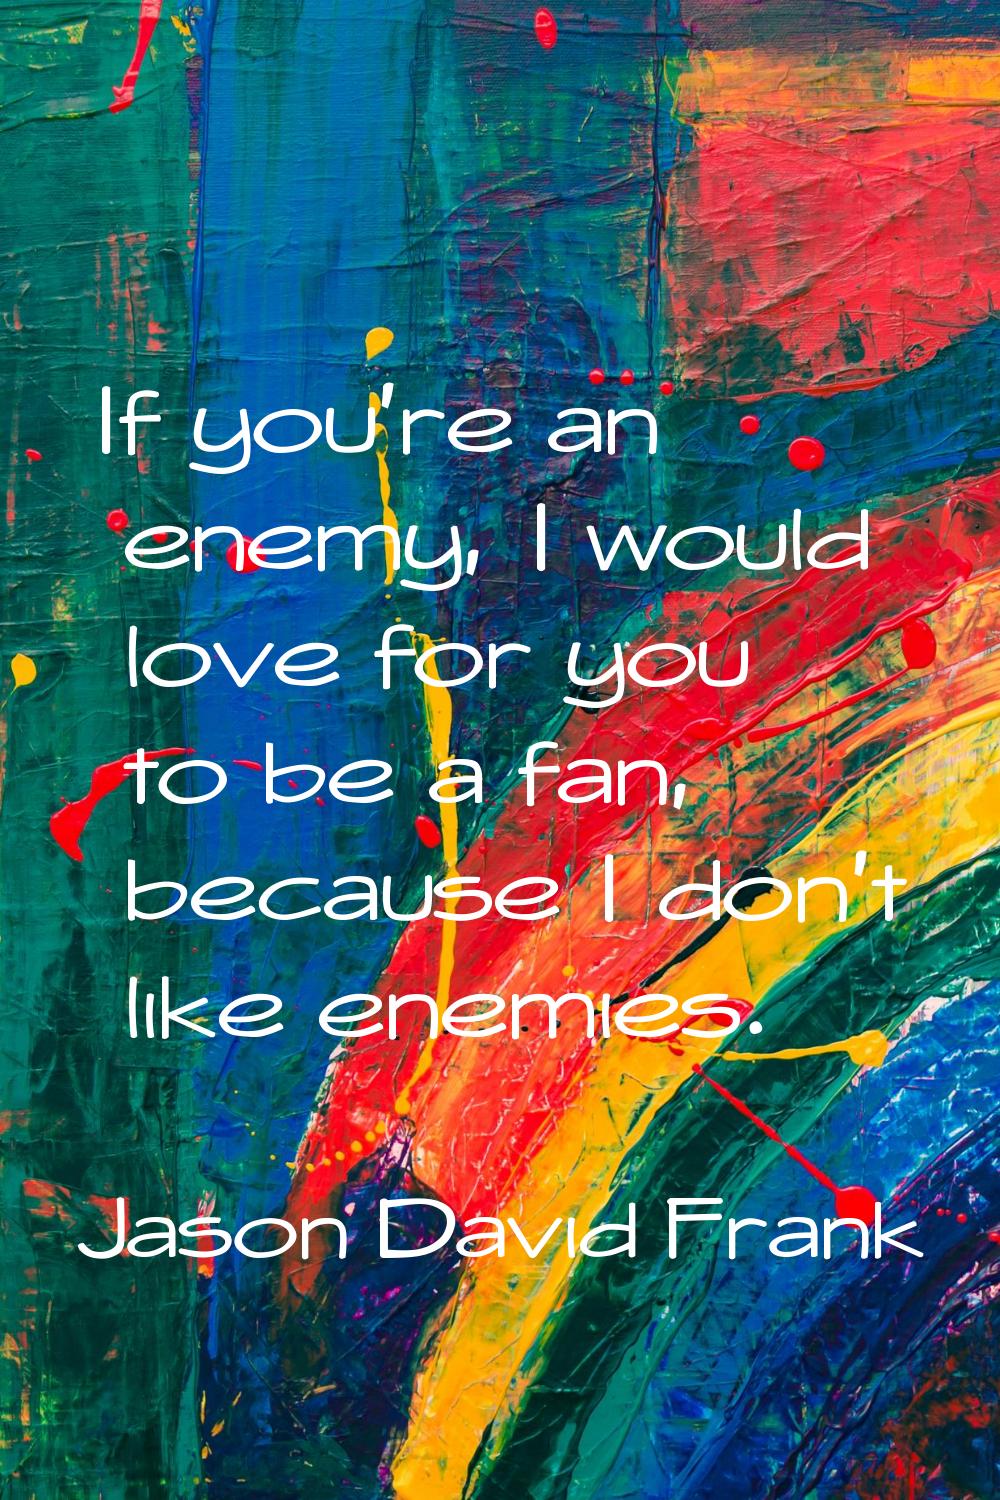 If you're an enemy, I would love for you to be a fan, because I don't like enemies.